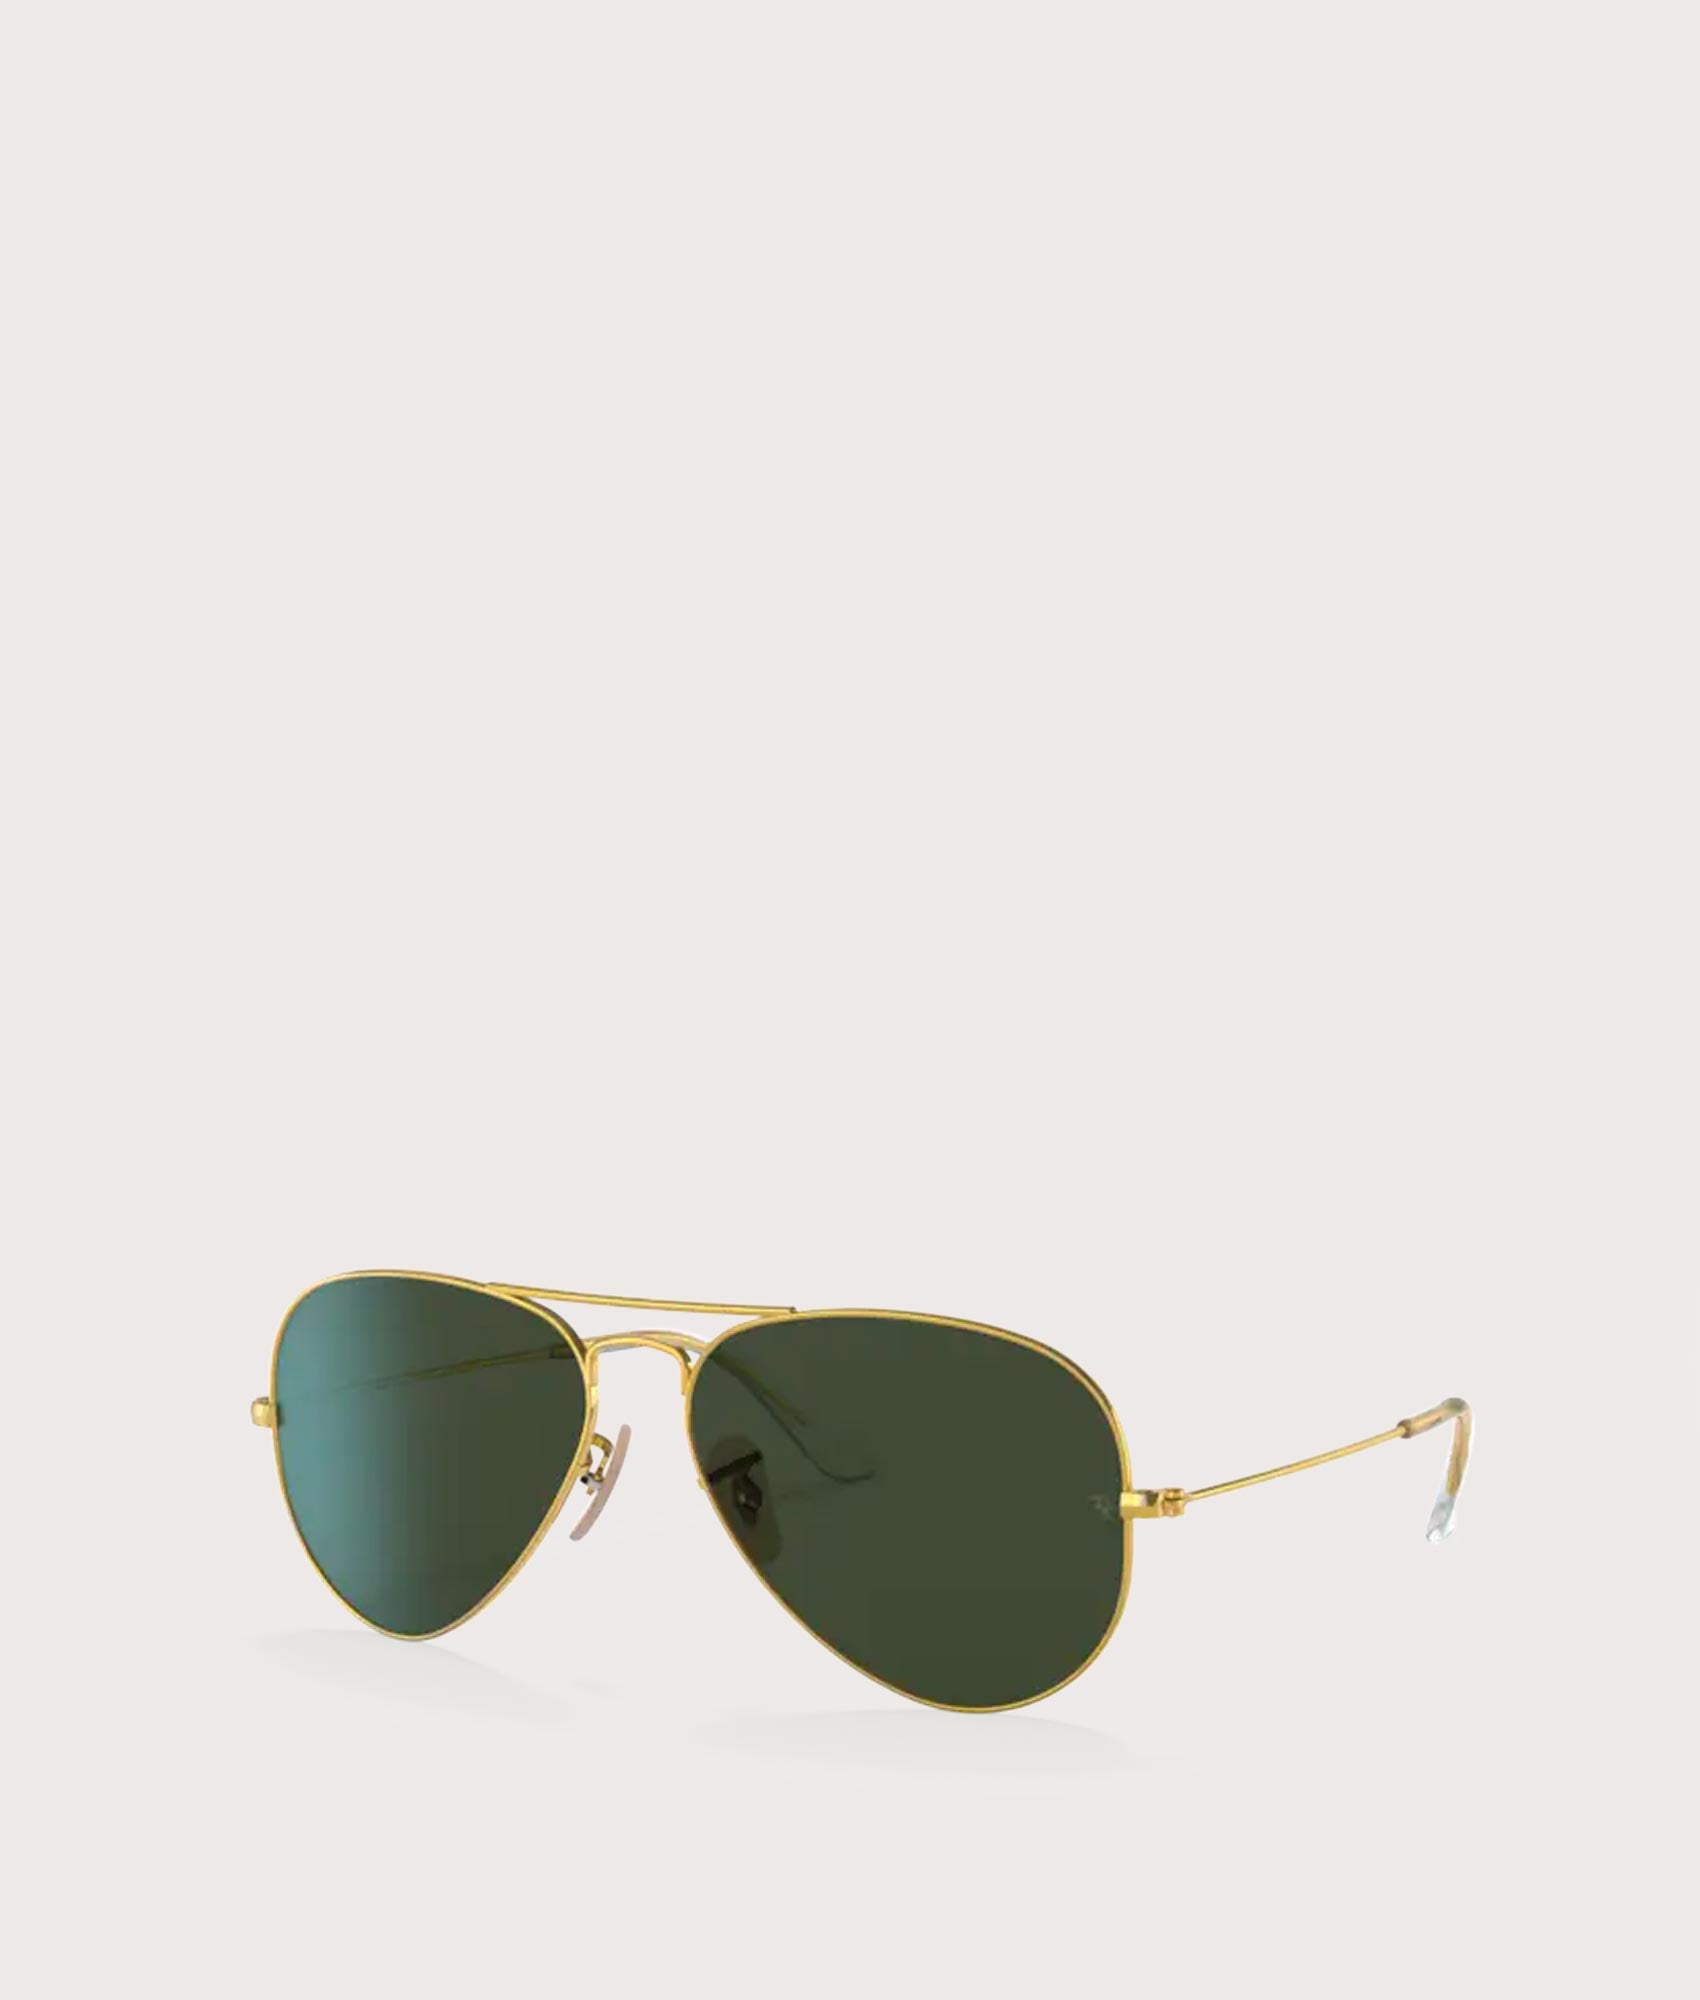 Ray-Ban Mens Aviator Large Metal Sunglasses - Colour: W3400 Polished Gold-Green Lens - Size: 58